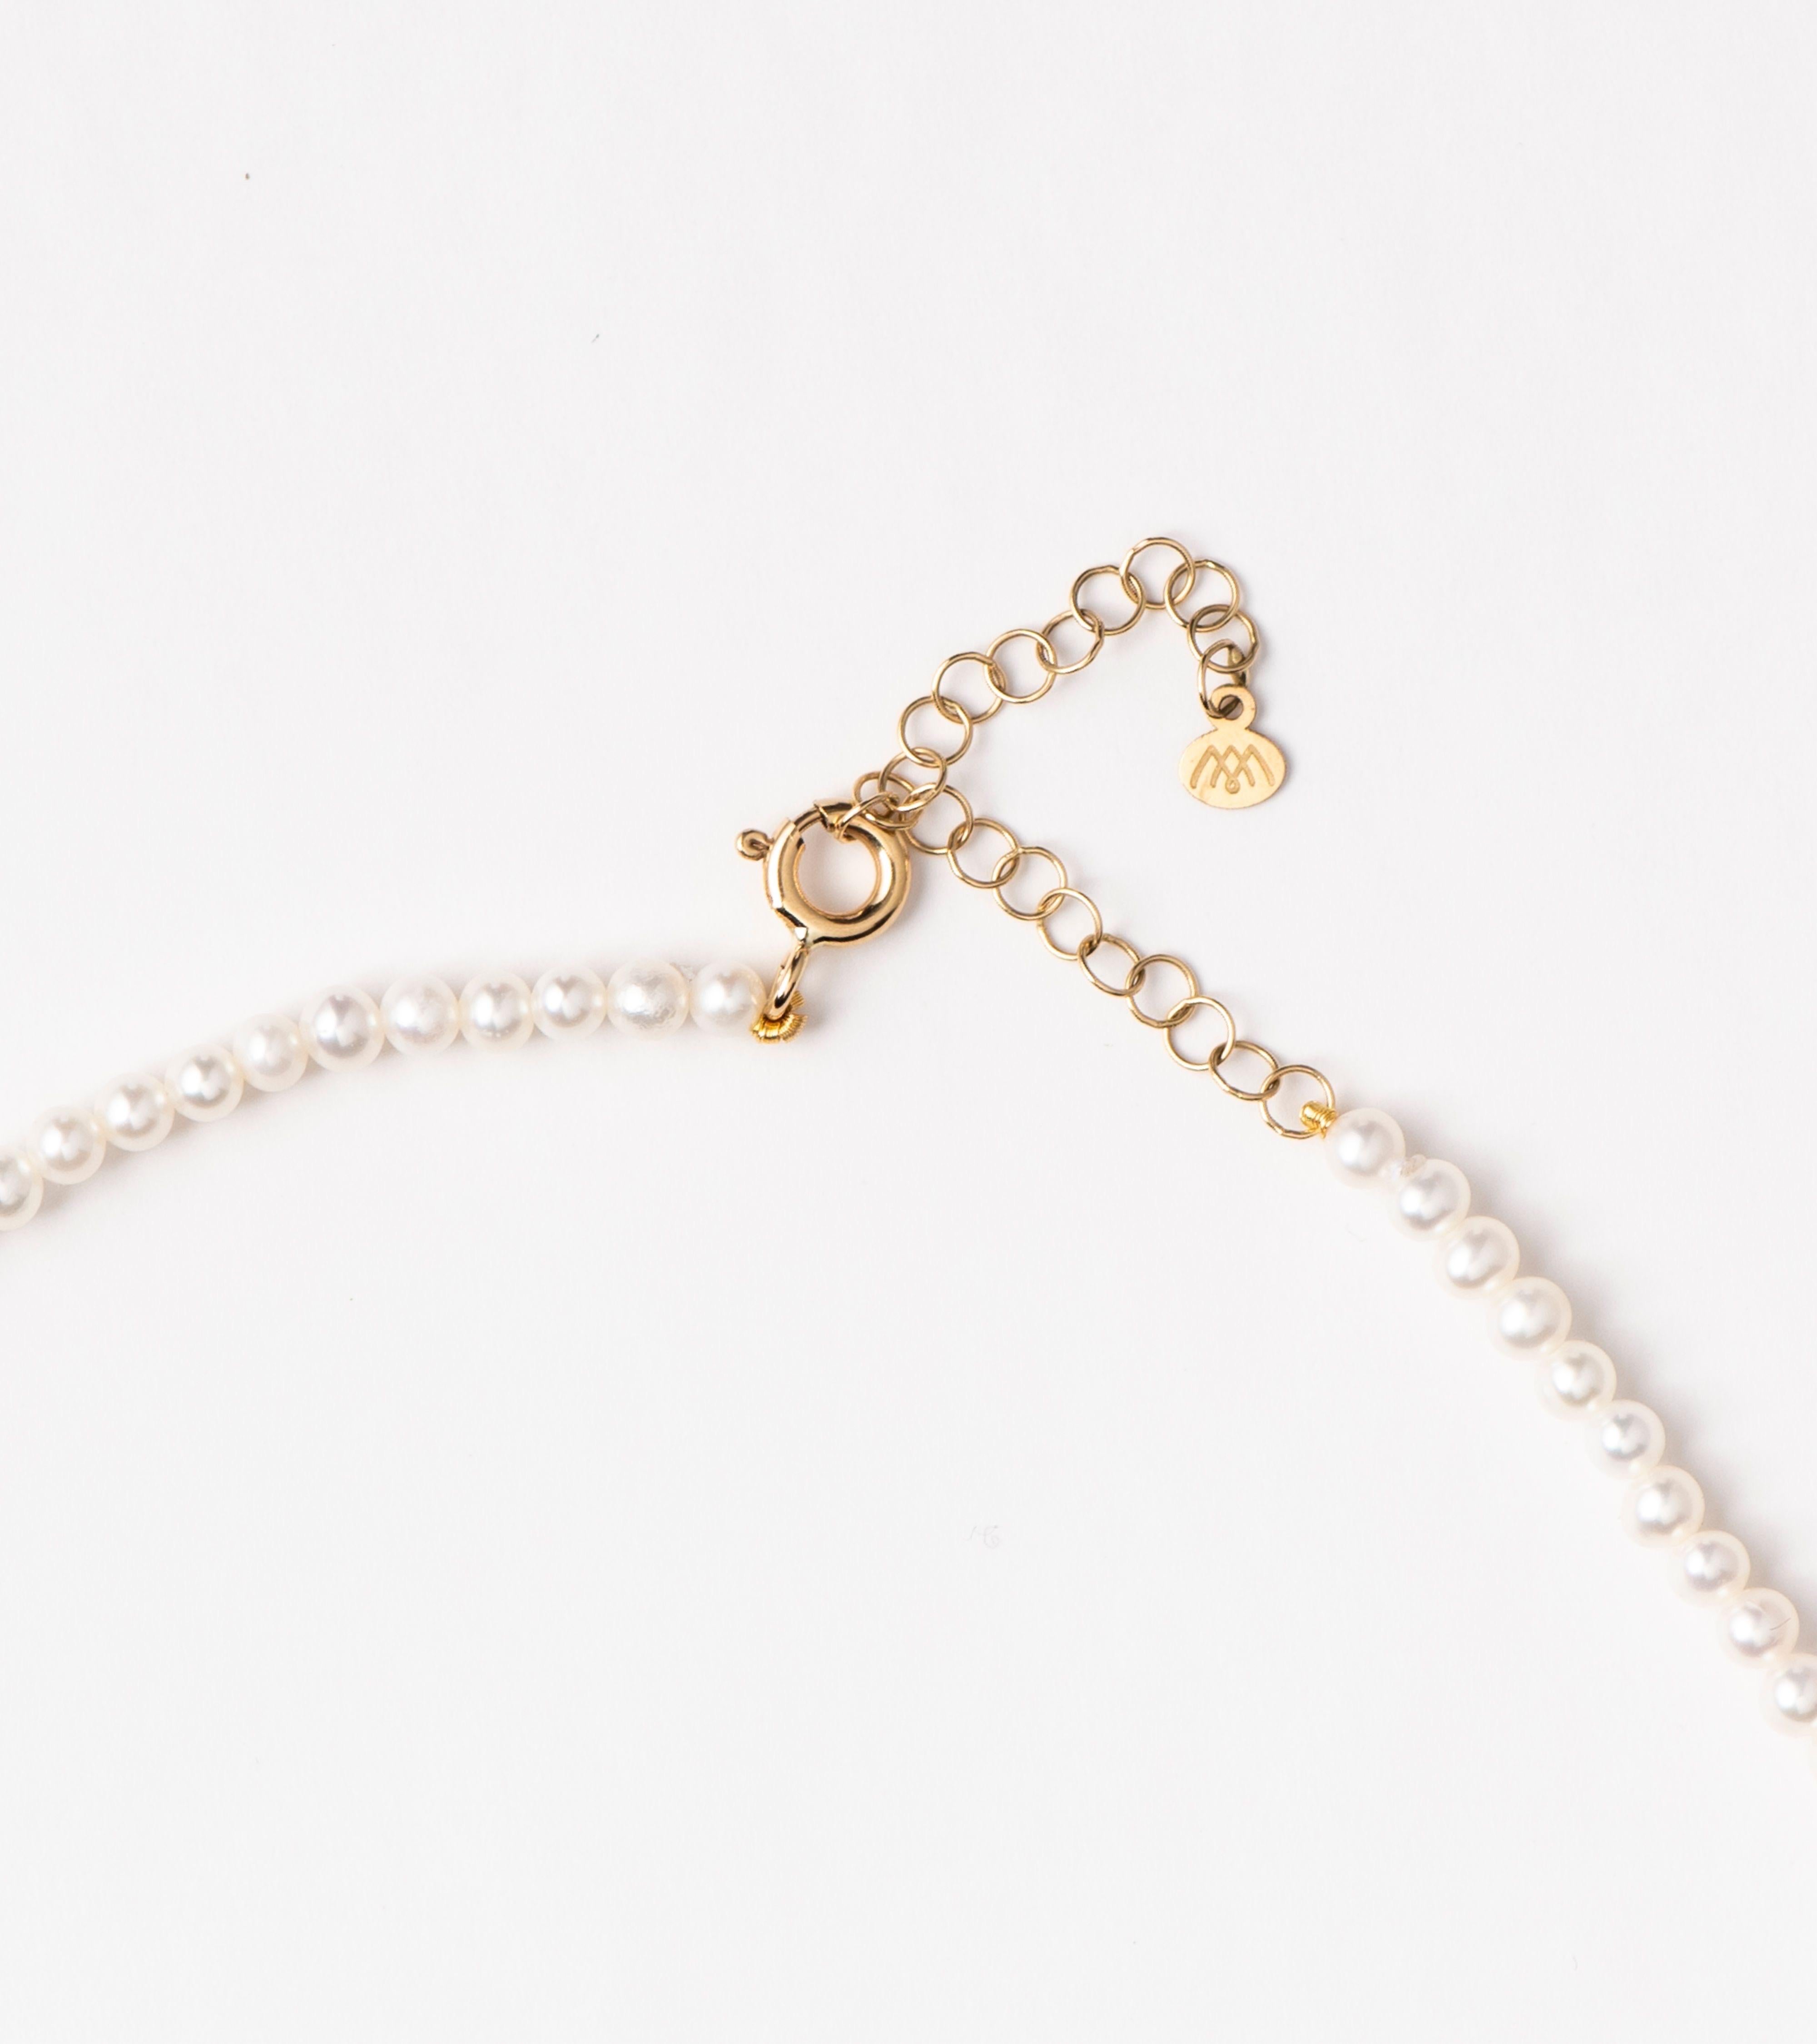 Our Baroque Charm on Mini Pearls Necklace features a baroque drop shaped pearl suspended from a strand of mini freshwater pearls and accentuated by glimmering diamonds on its hook. Its timeless silhouette combined with the high-quality materials